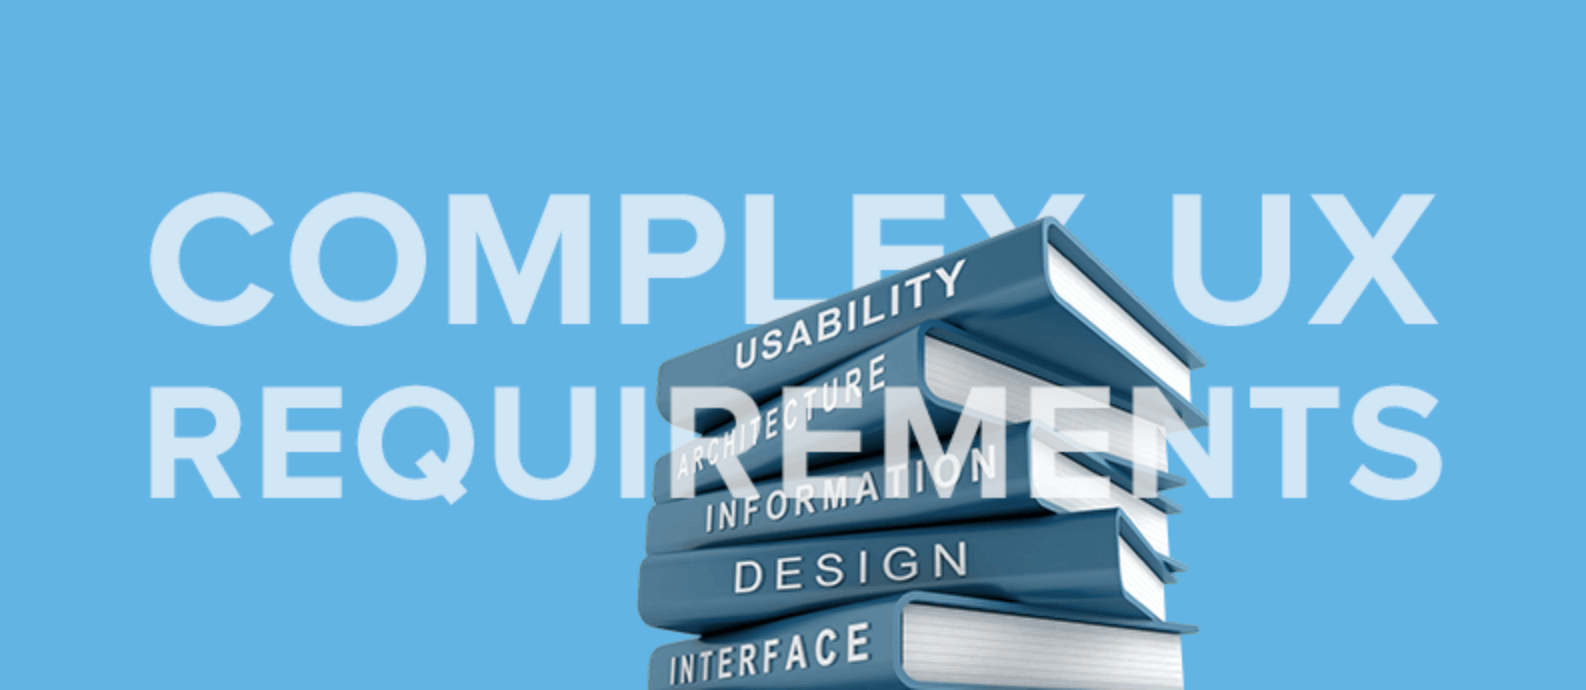 complex ux requirements, usability and design of websites